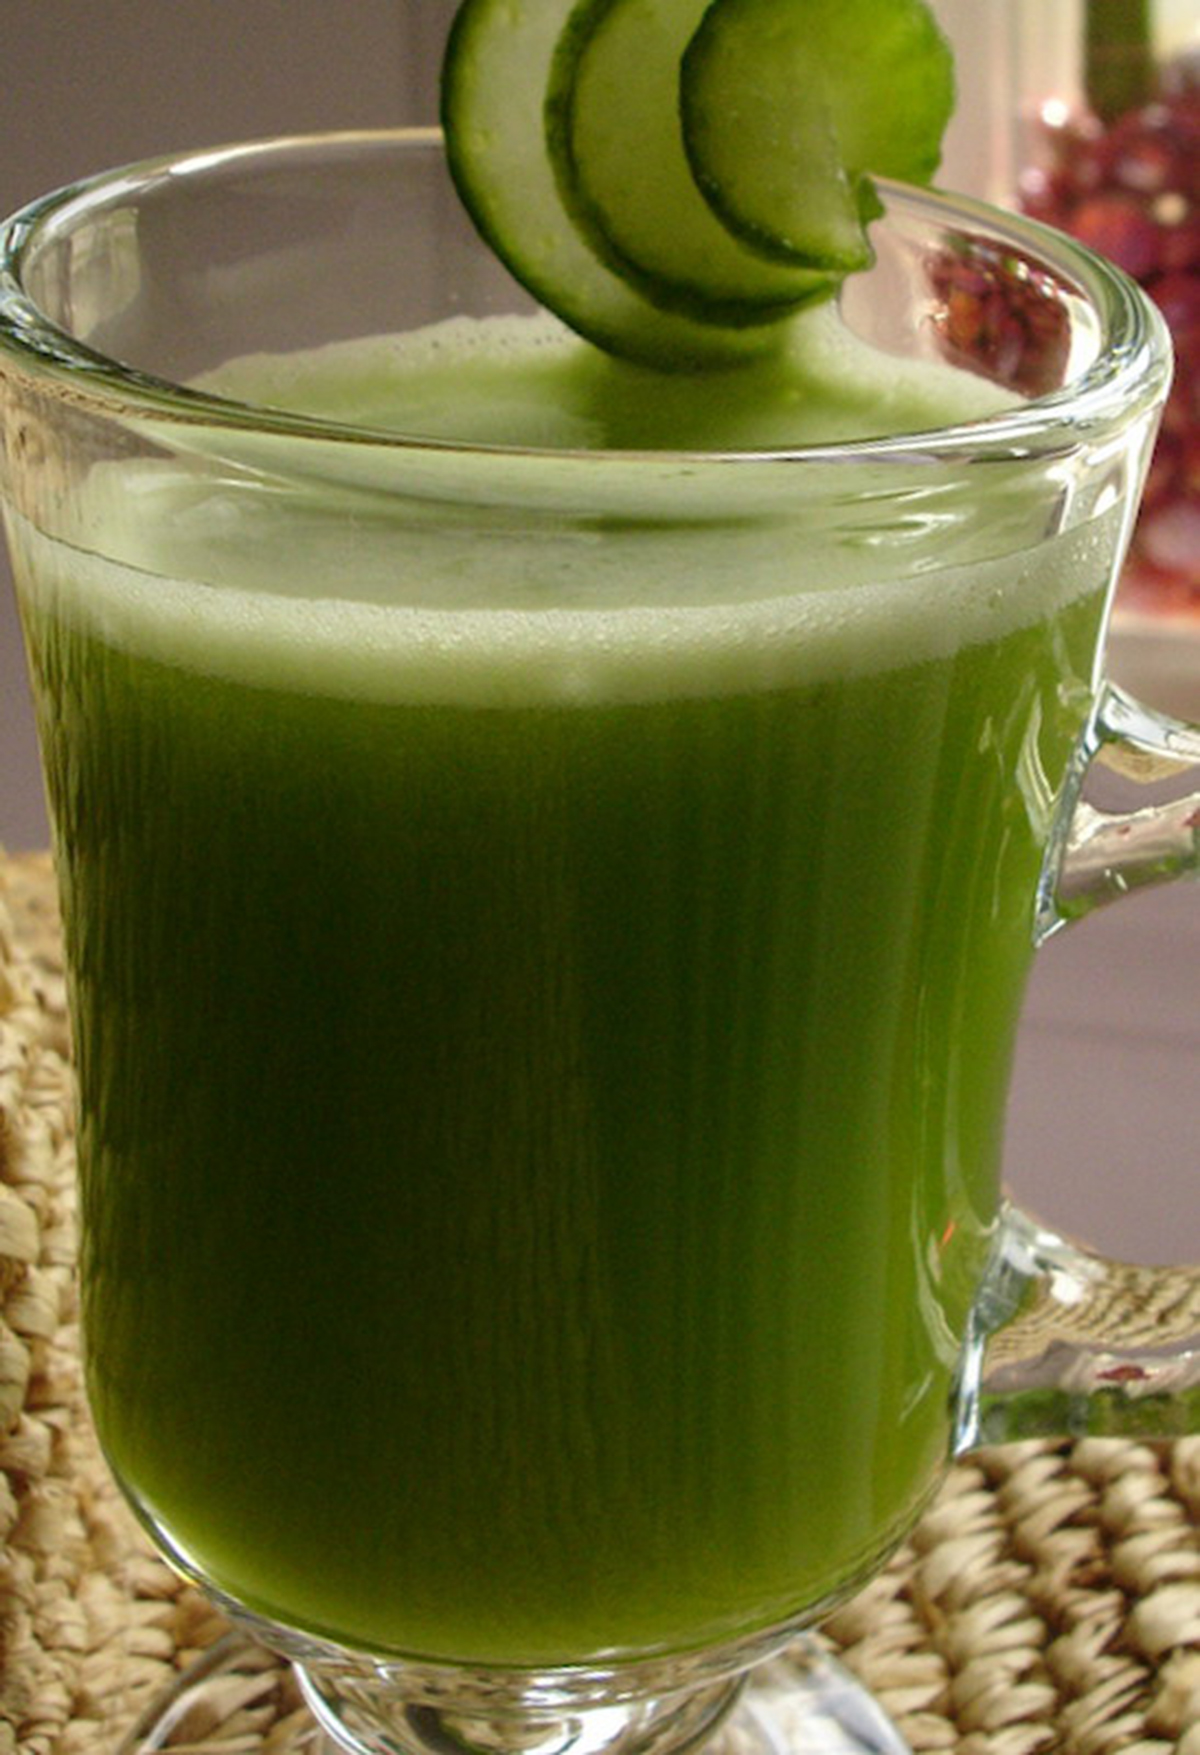 Celery juice and health benefits | General center | SteadyHealth.com